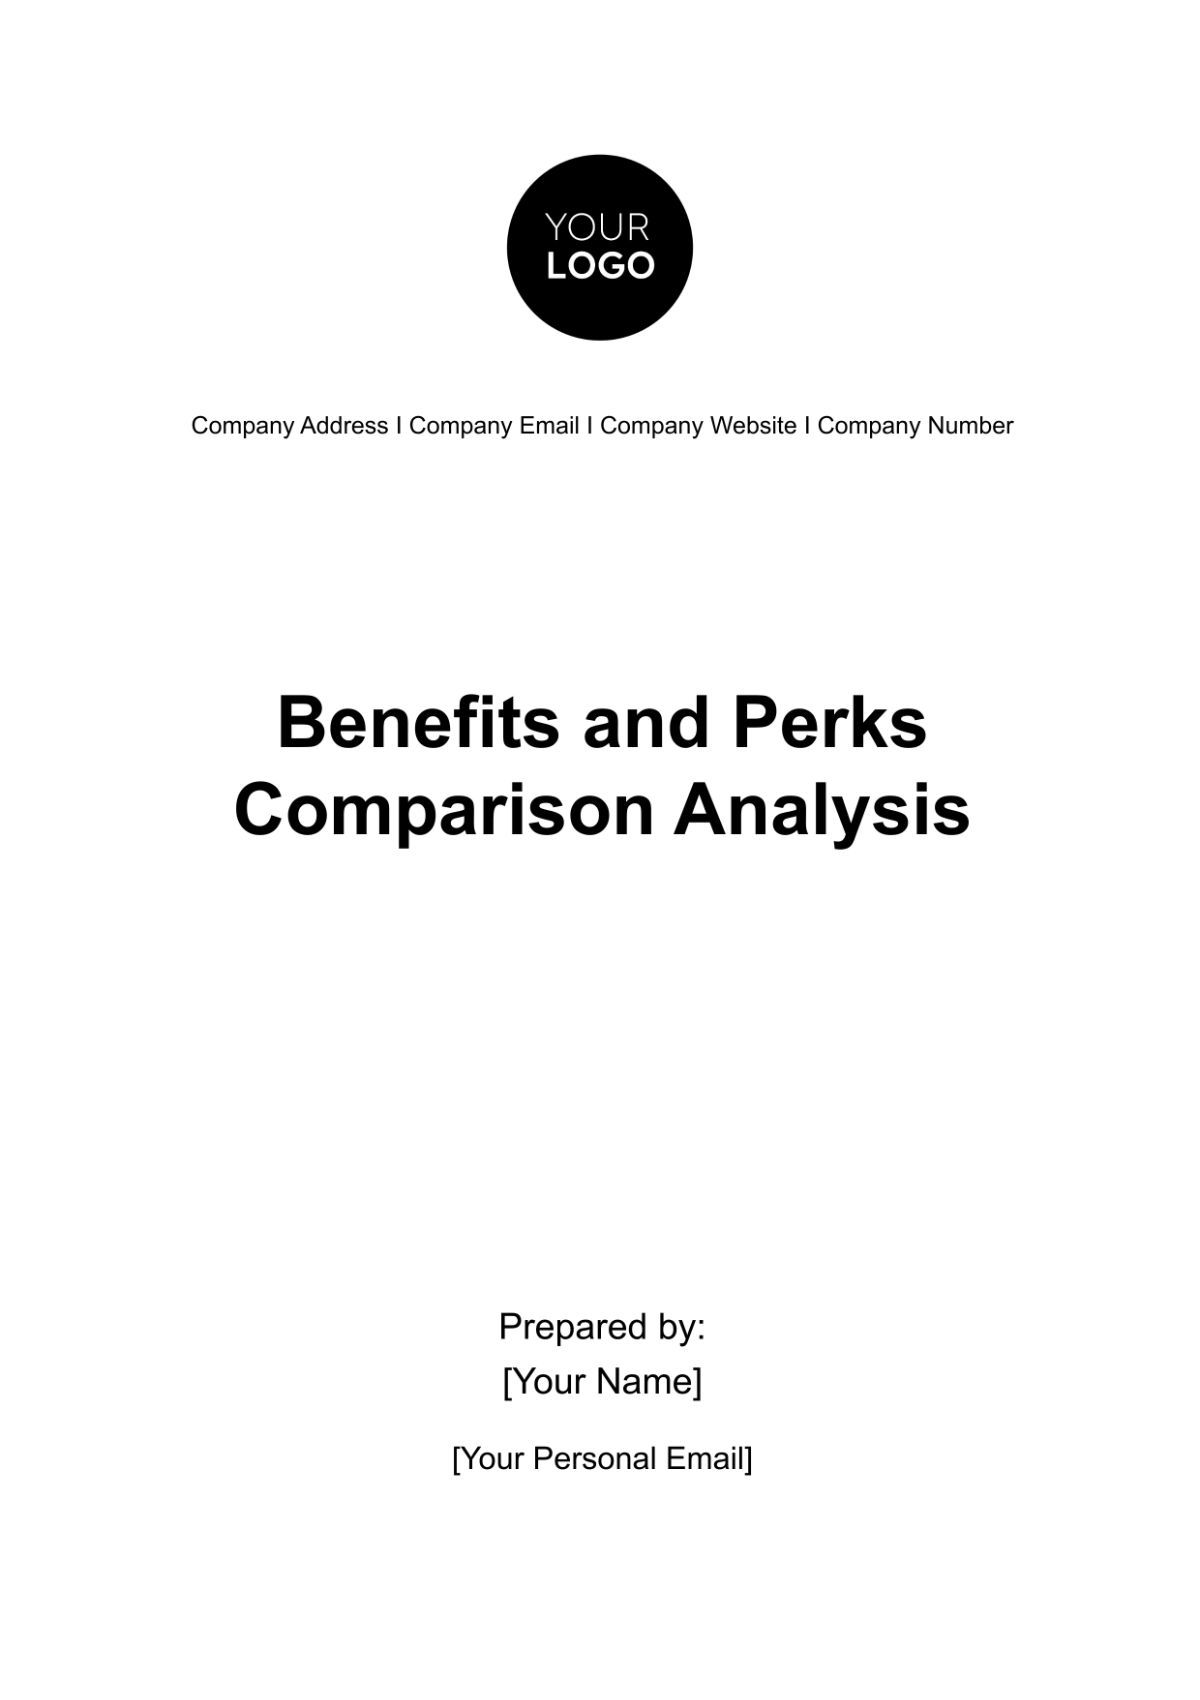 Free Benefits and Perks Comparison Analysis HR Template